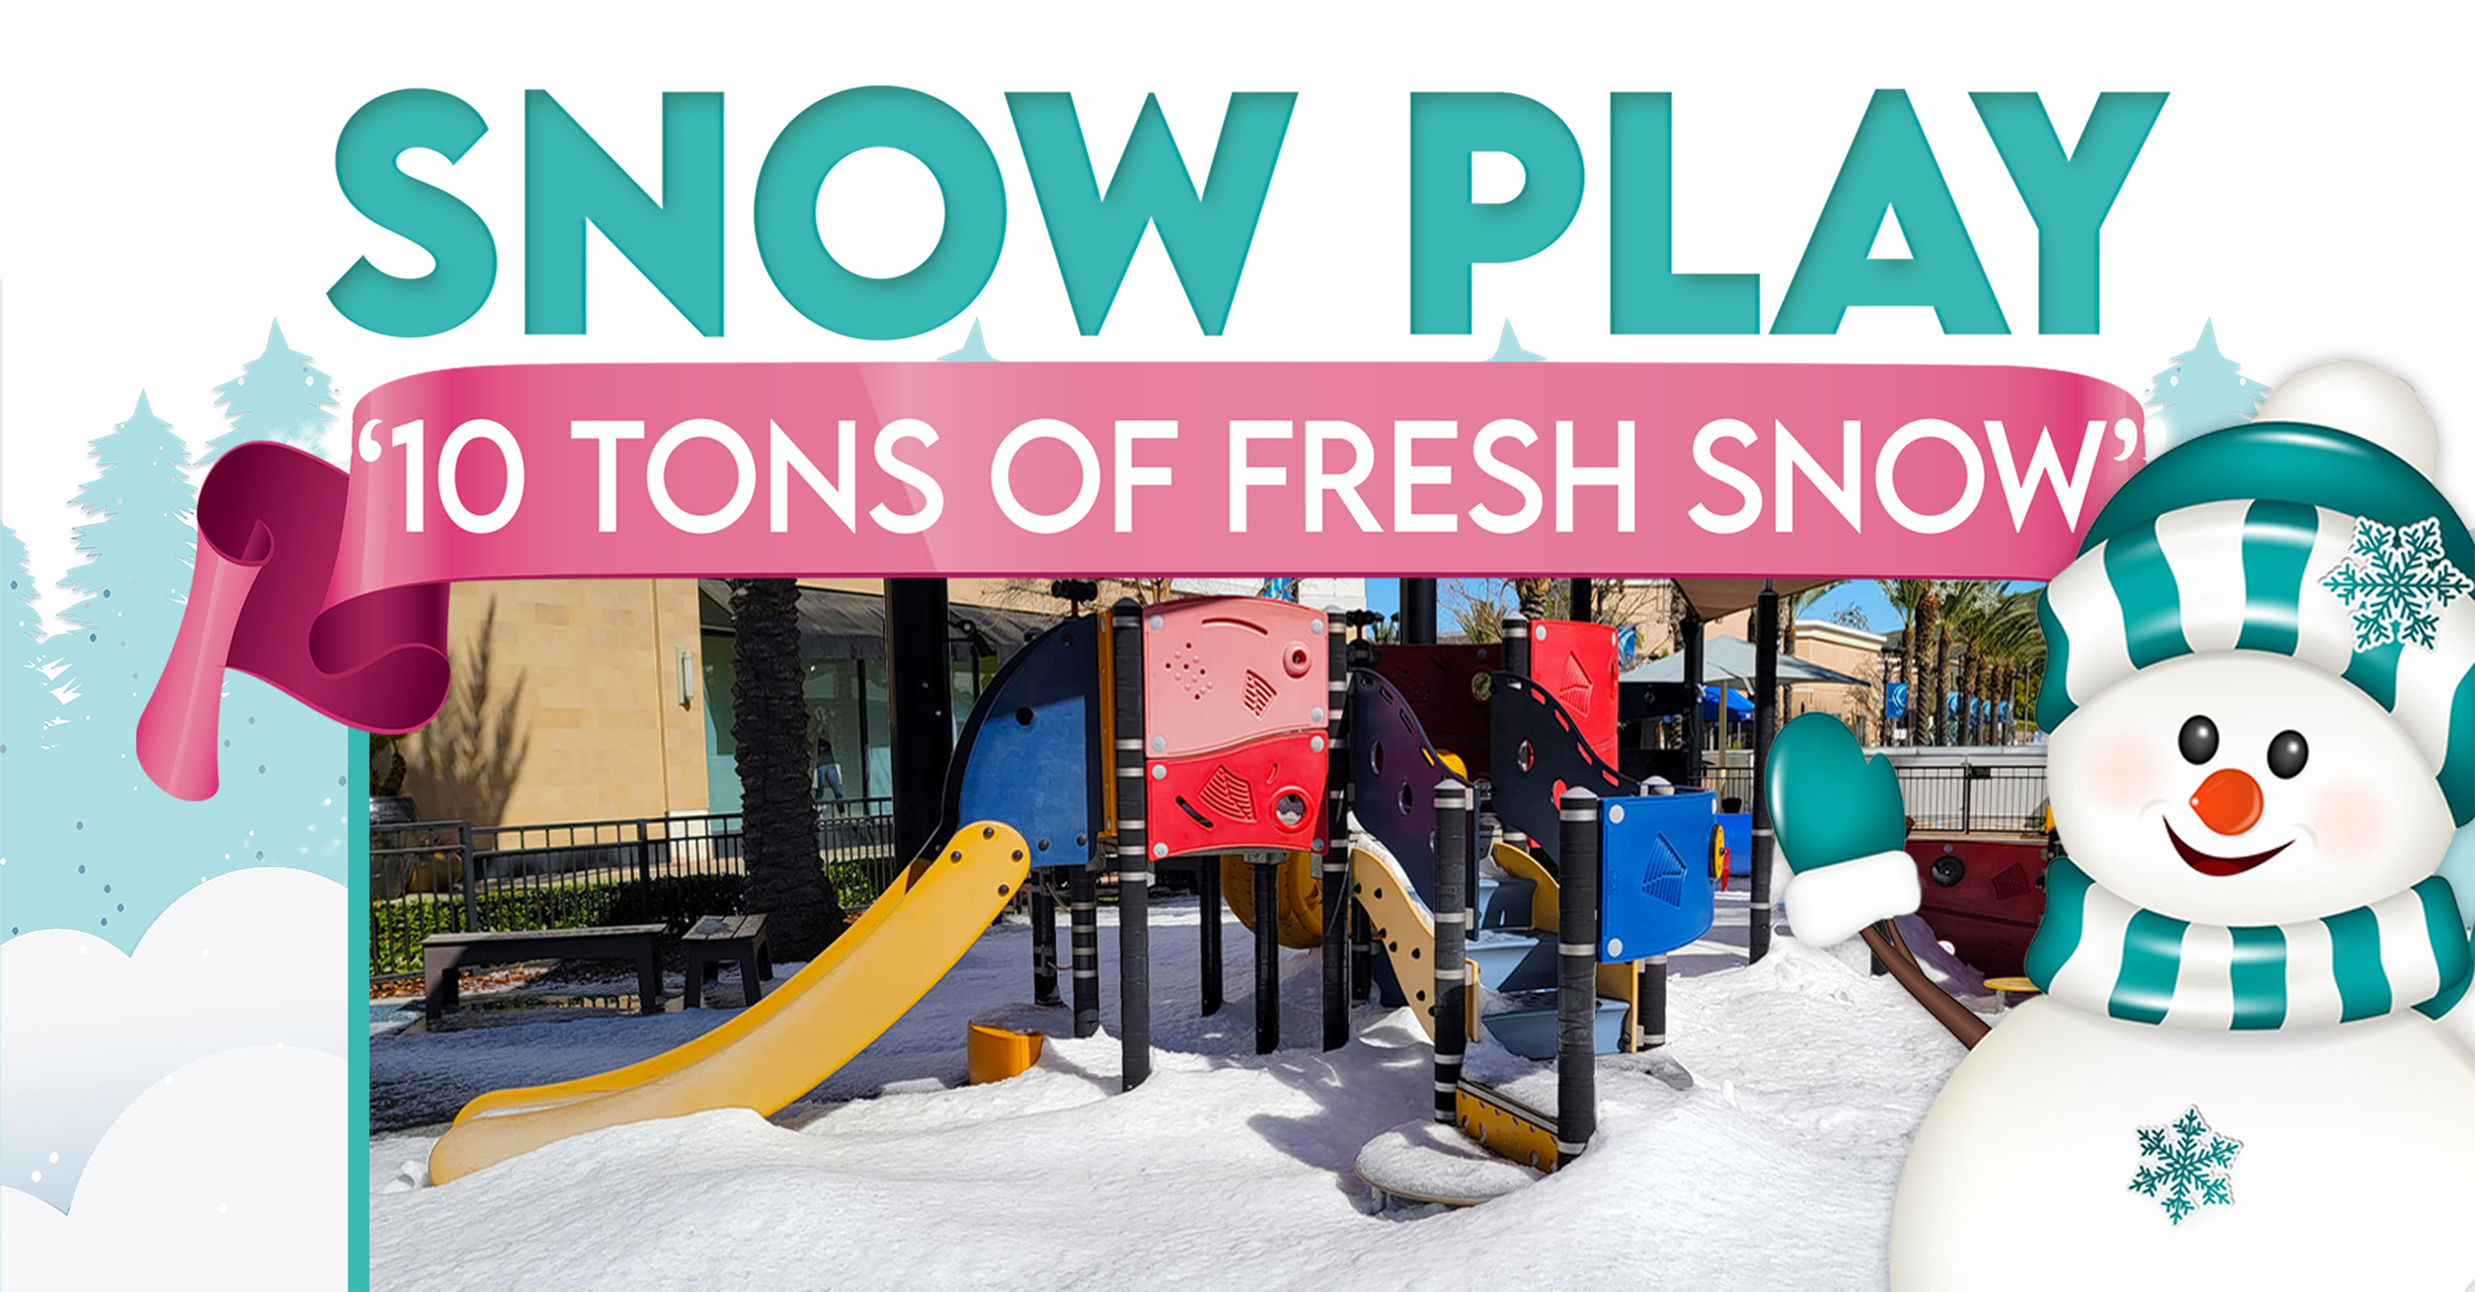 Snow Play “10 Tons of Fresh Snow” January 28th & February 11th